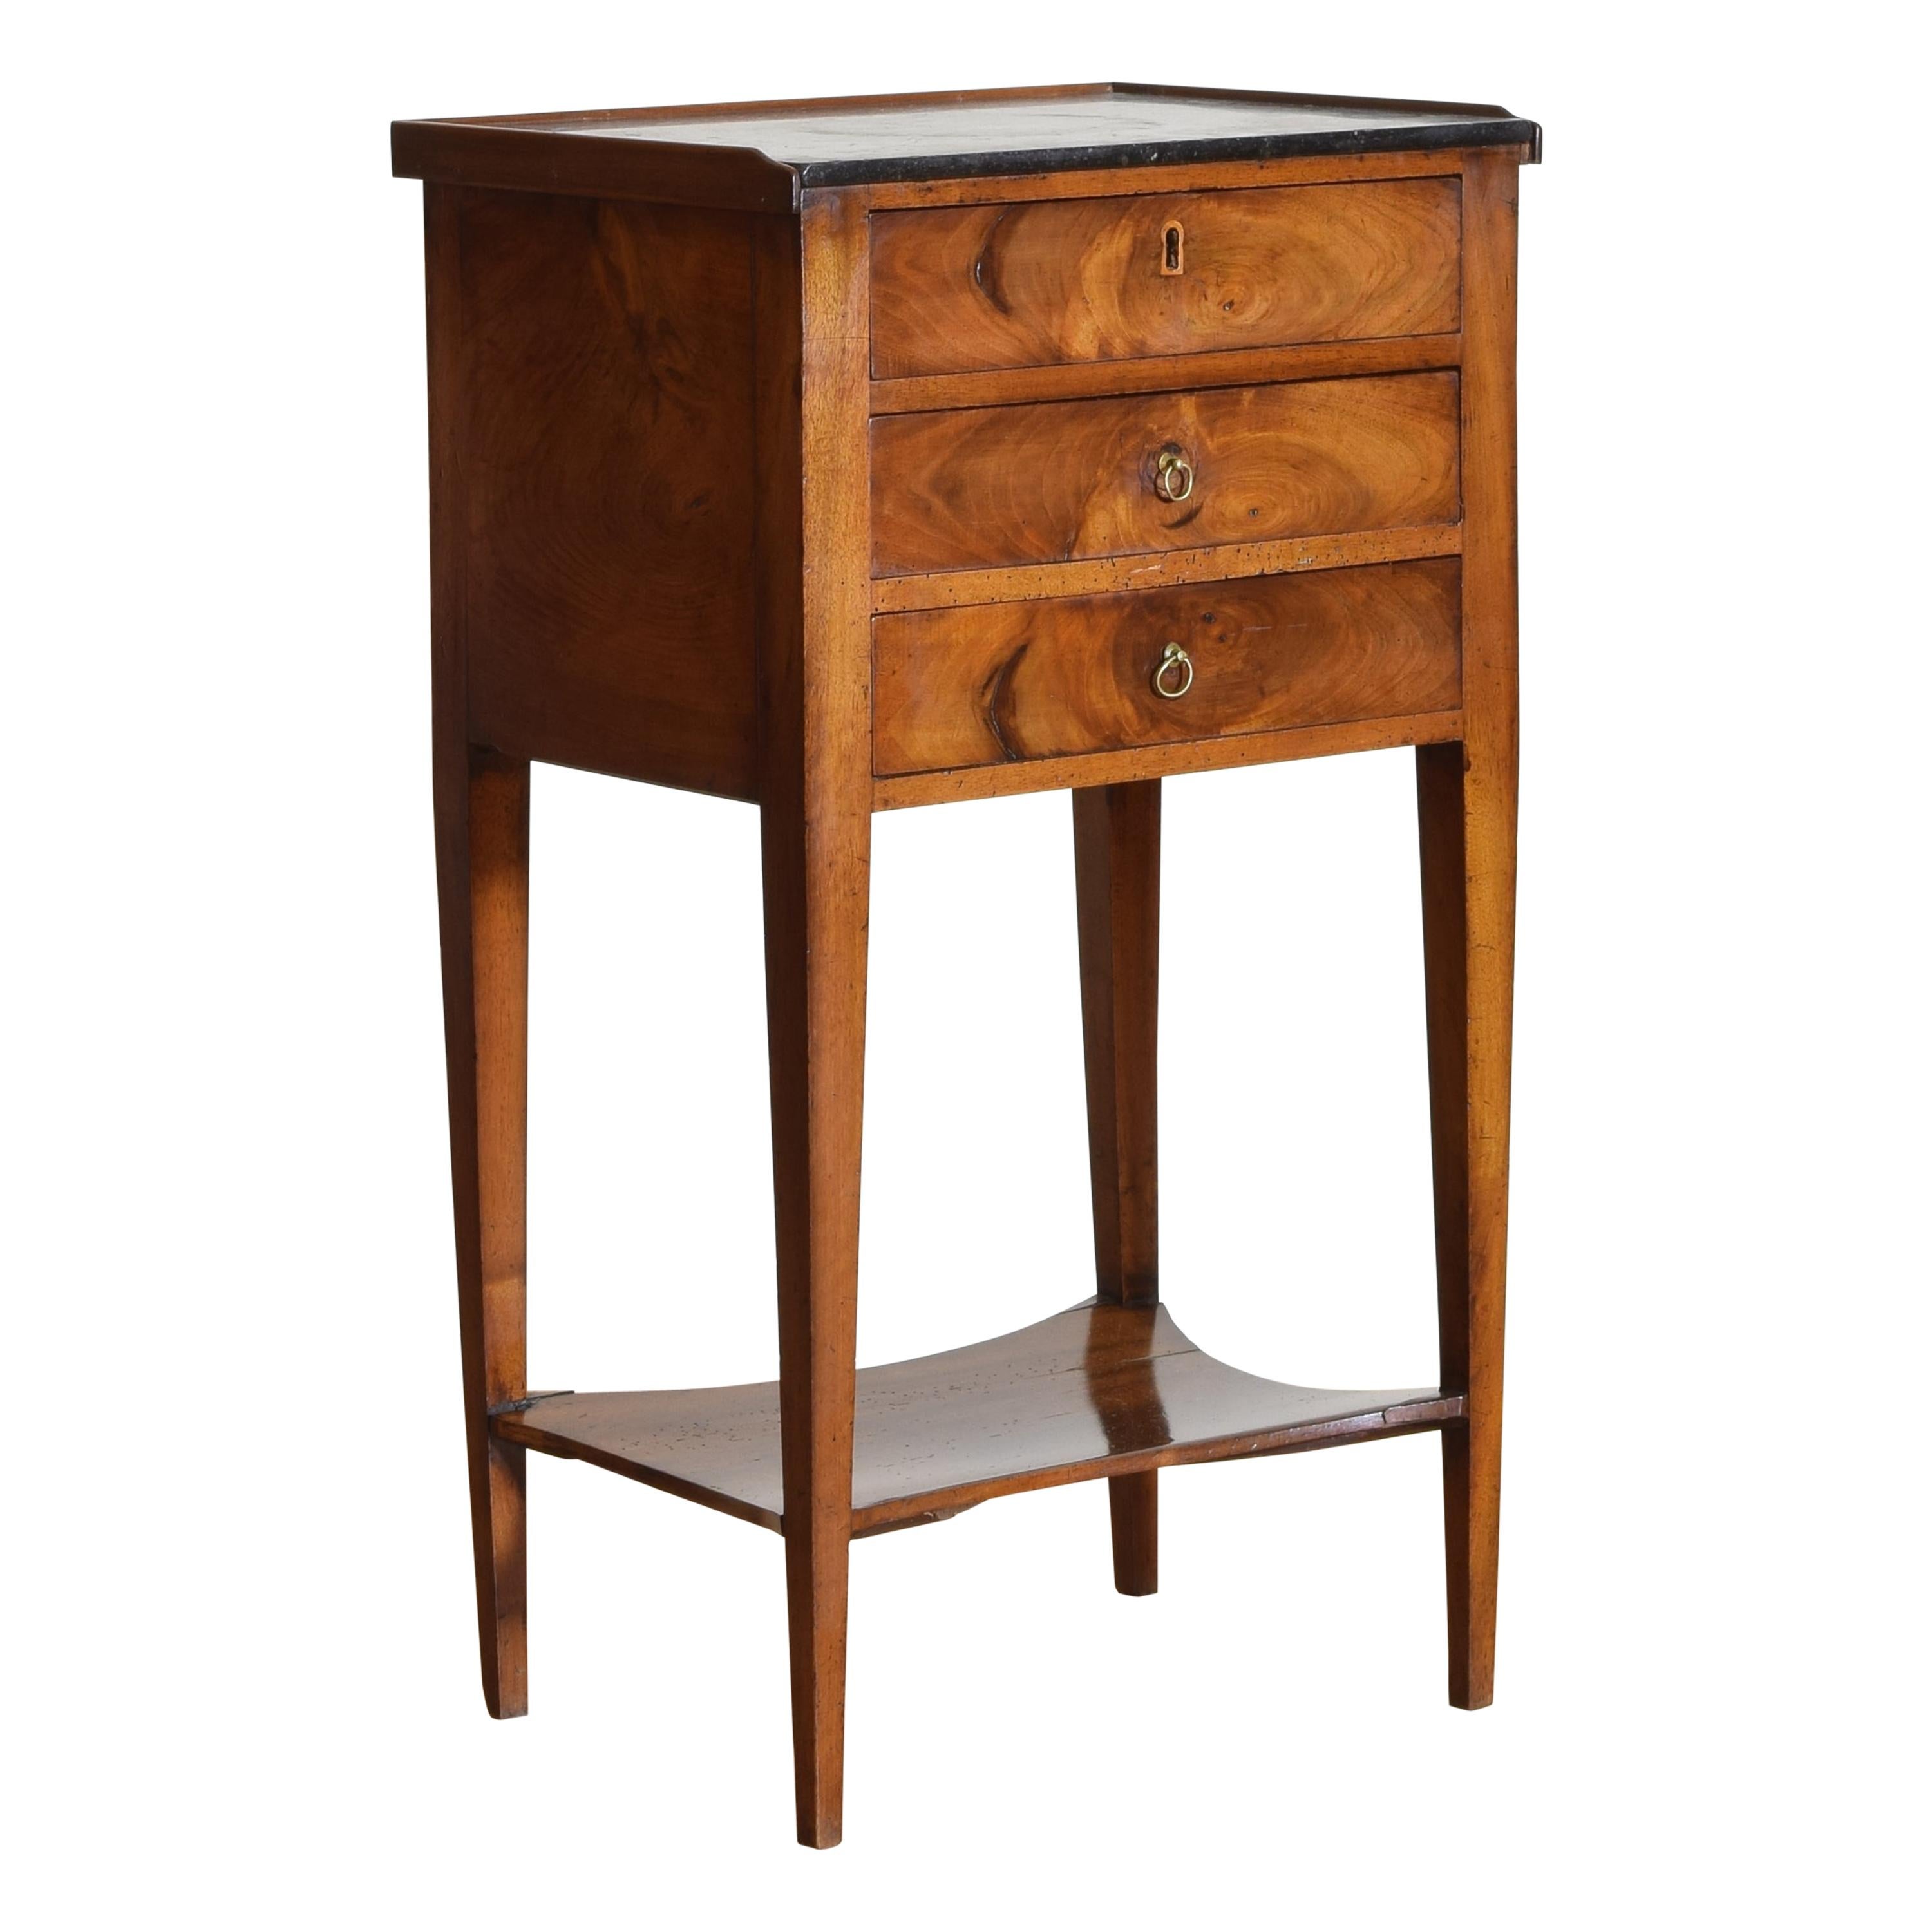 French Directoire Period Walnut Tiered 3-Drawer Marble-Top Commode, 19th Century